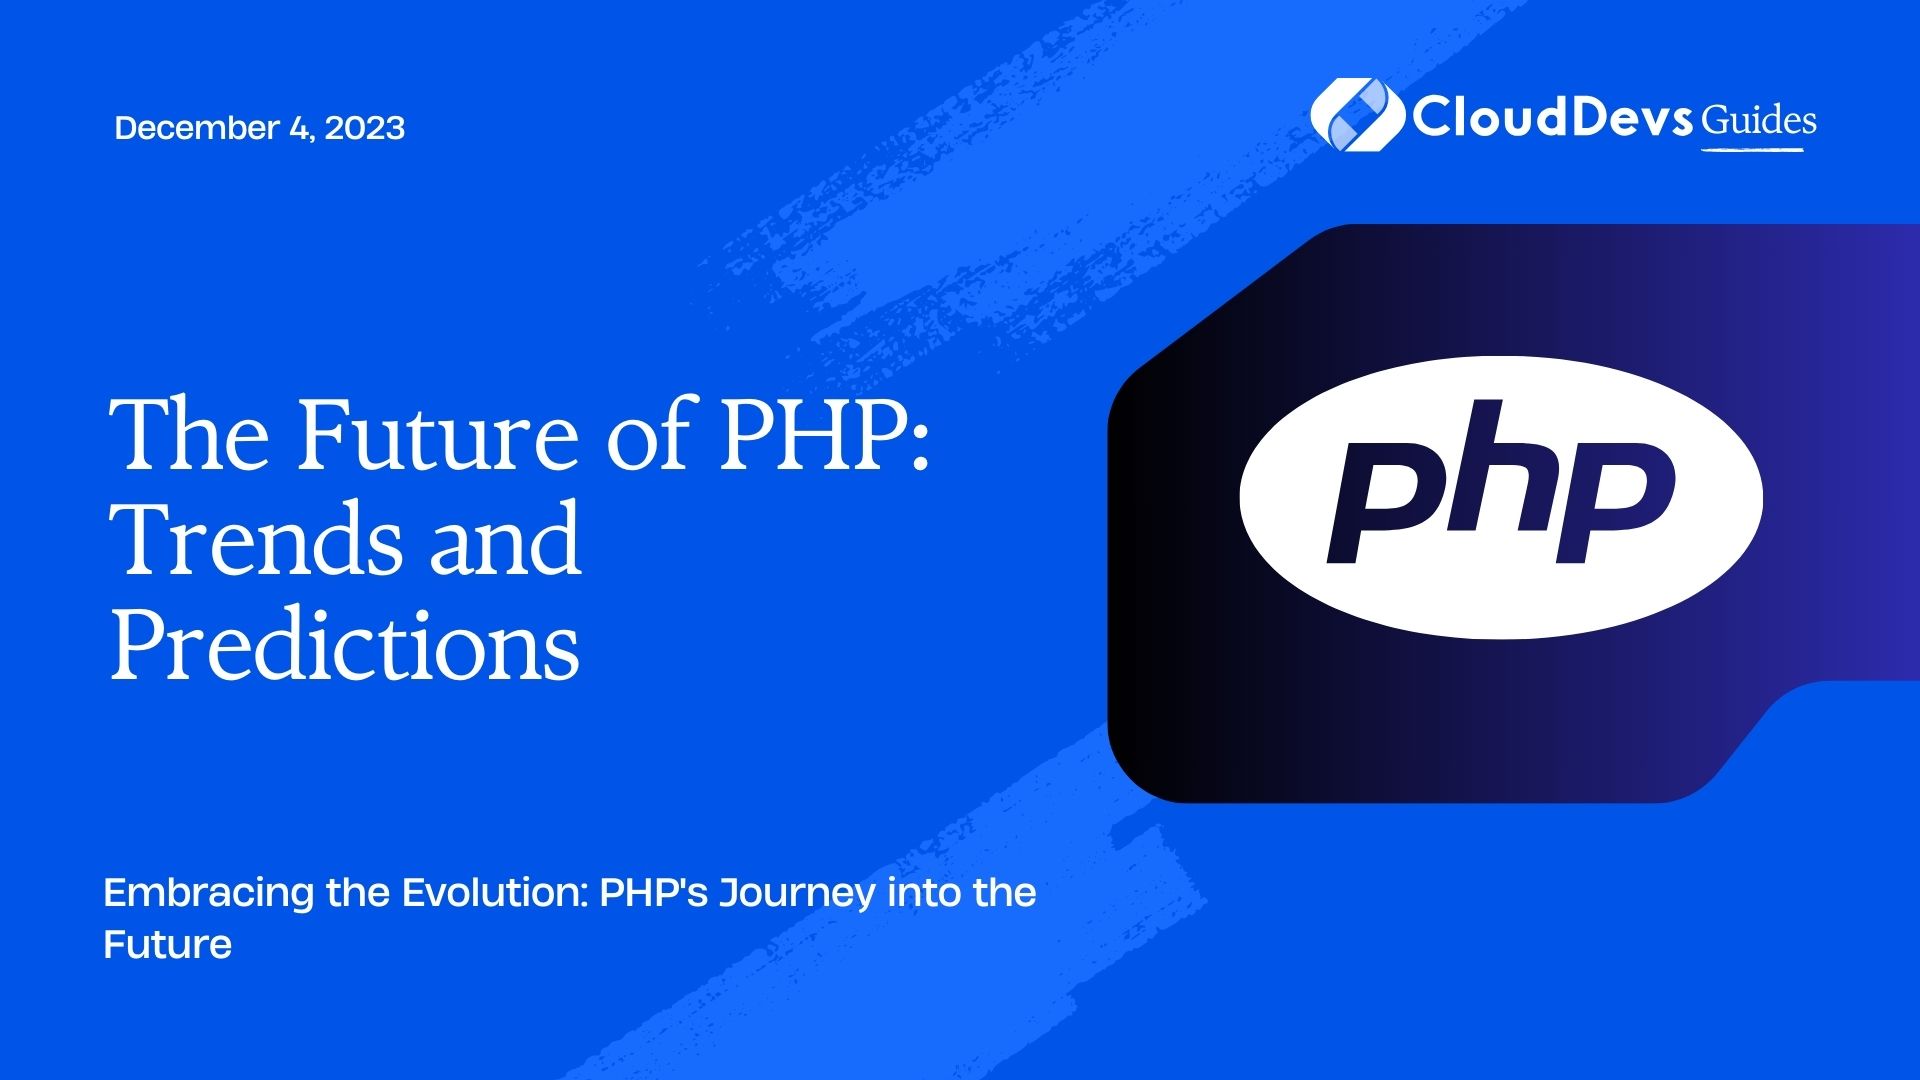 The Future of PHP: Trends and Predictions